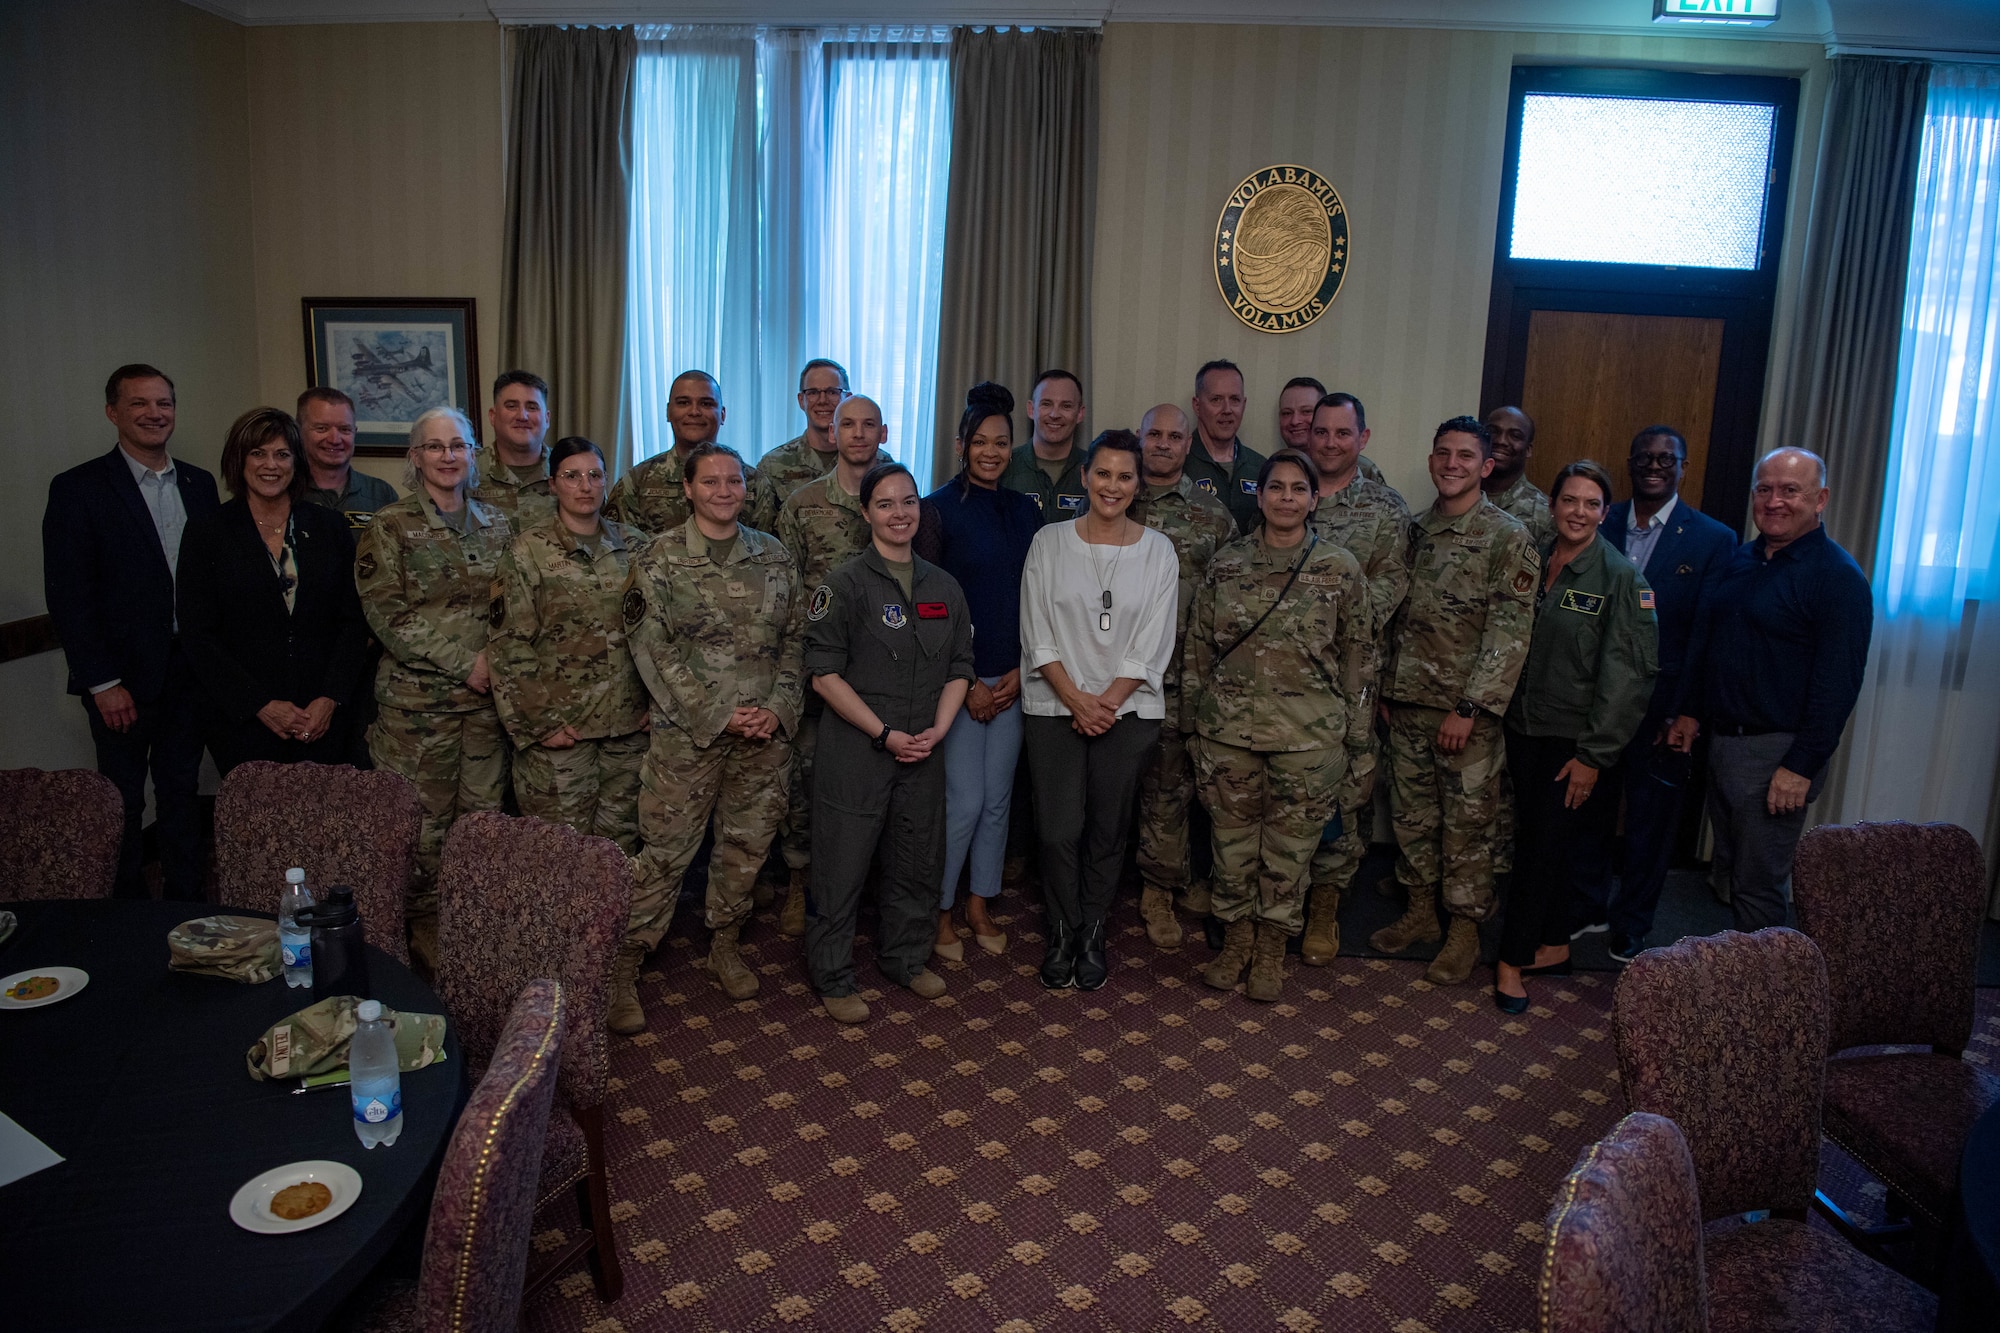 Michigan Gov. Gretchen Whitmer, front center, stands with attendees of a social event at Ramstein Air Base, Germany, June 22, 2023.